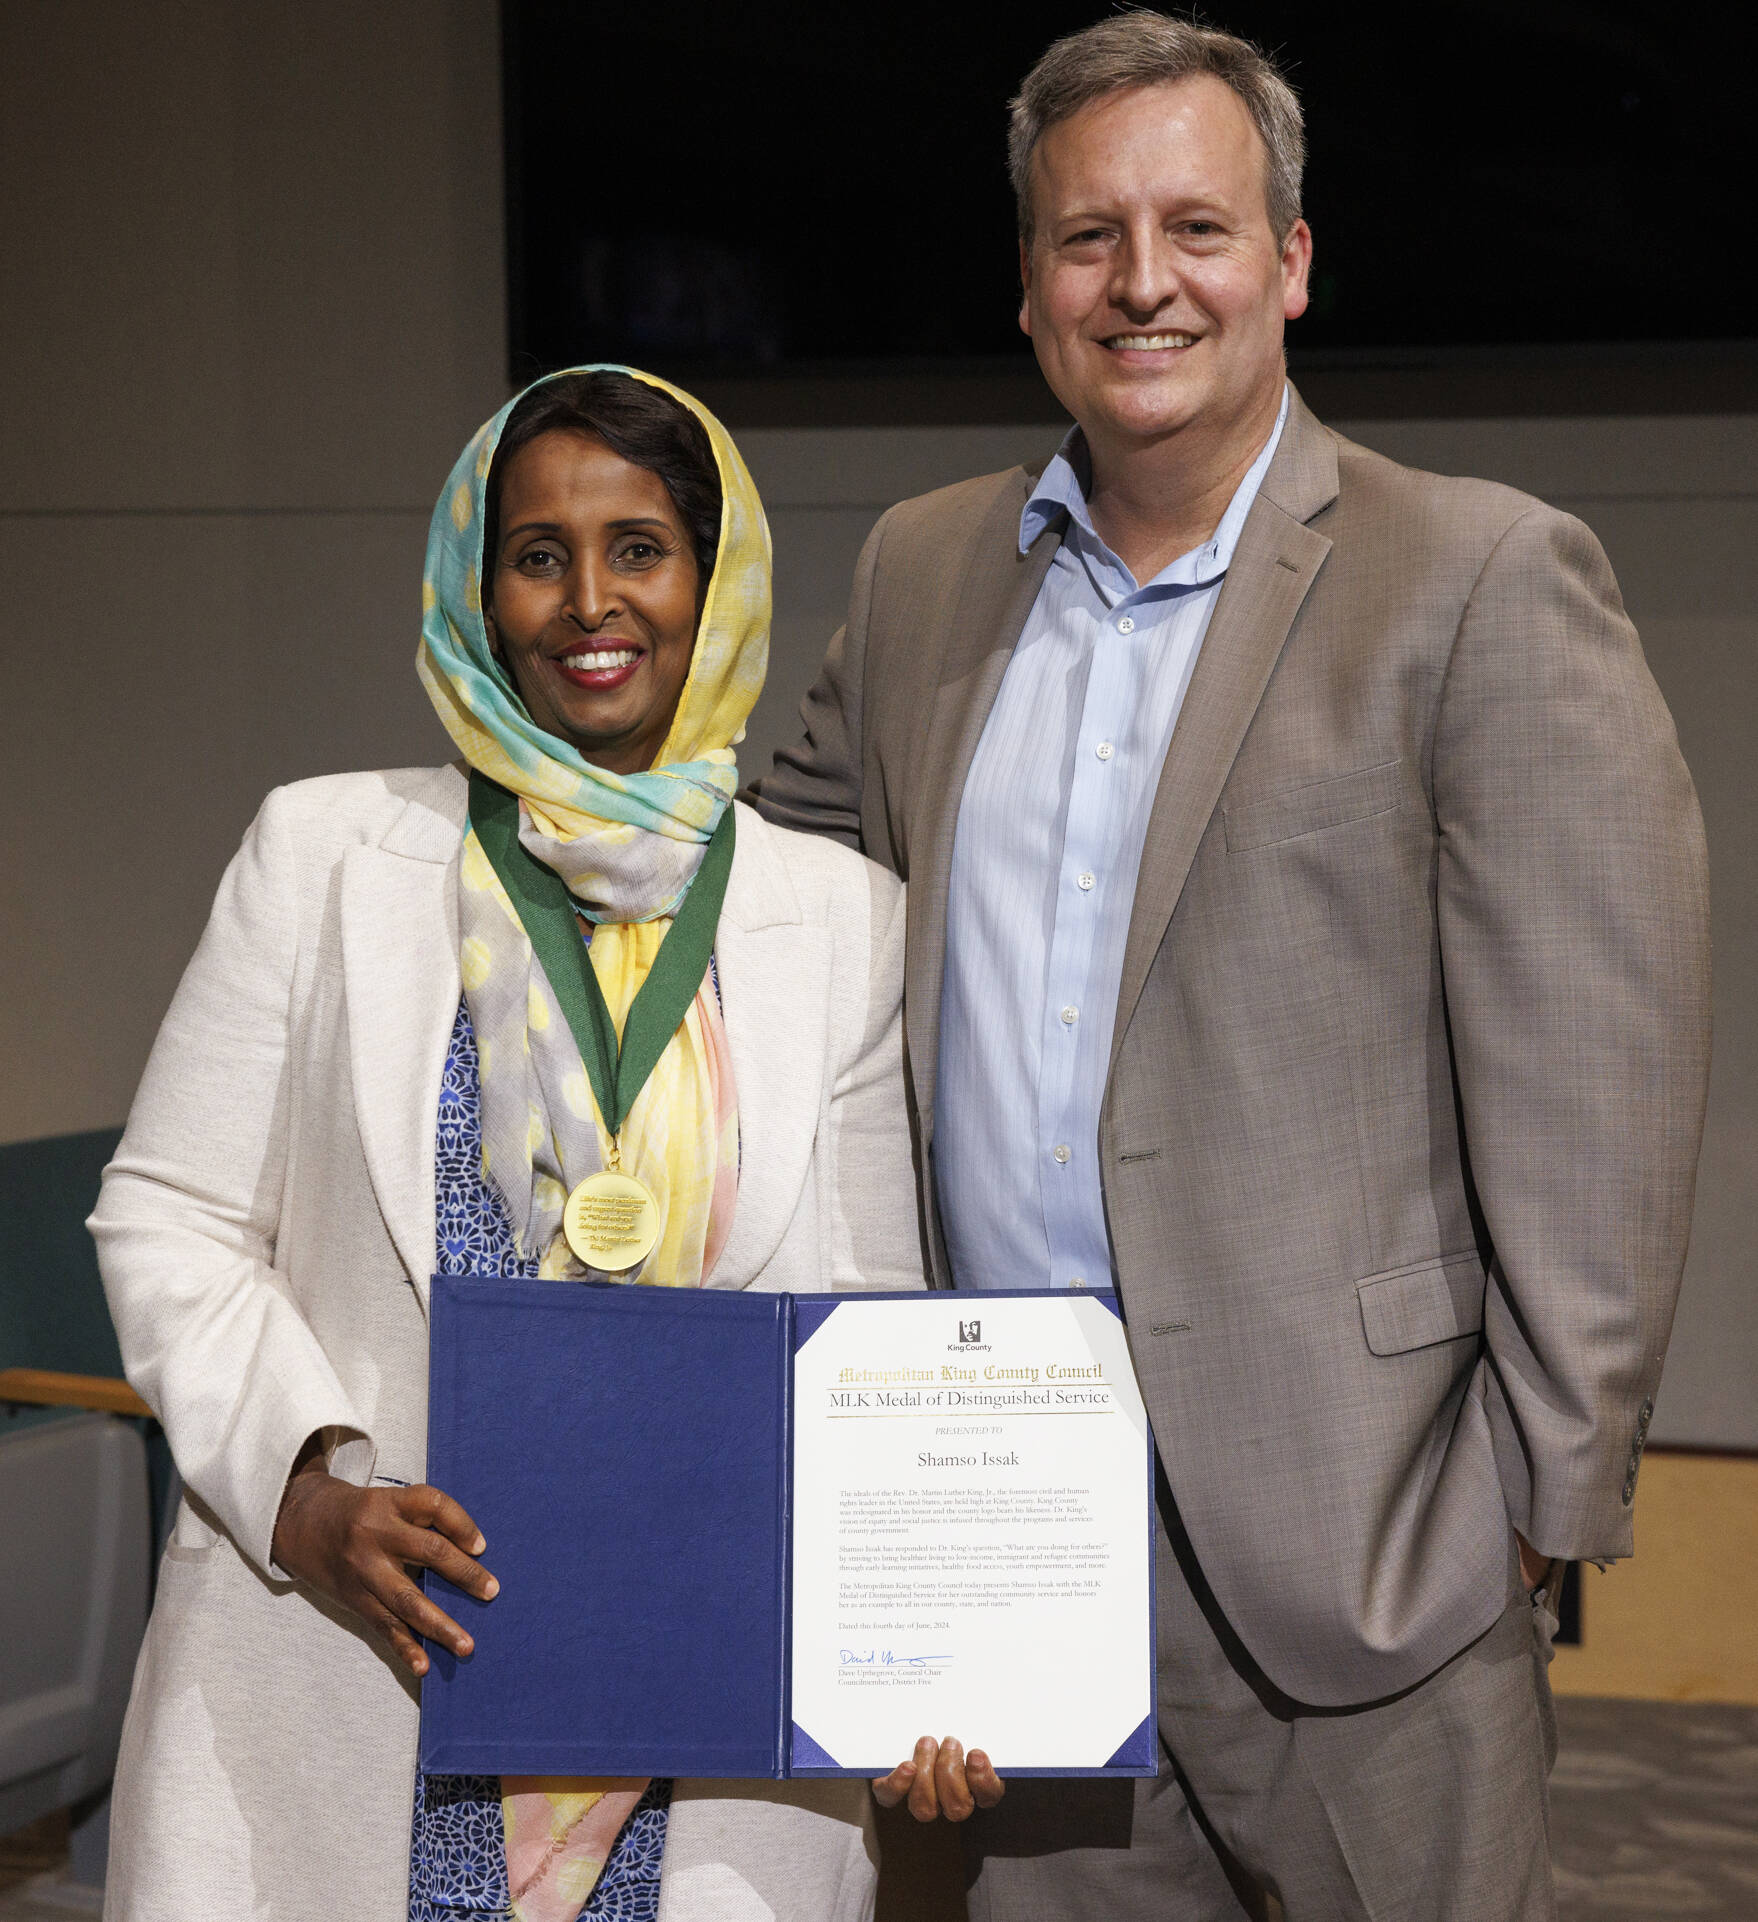 Shamso Issak, of Kent, receives King County’s Martin Luther King Jr. Distinguished Service Award from County Councilmember Dave Upthegrove June 4 at the Council chambers in Seattle. COURTESY PHOTO, King County